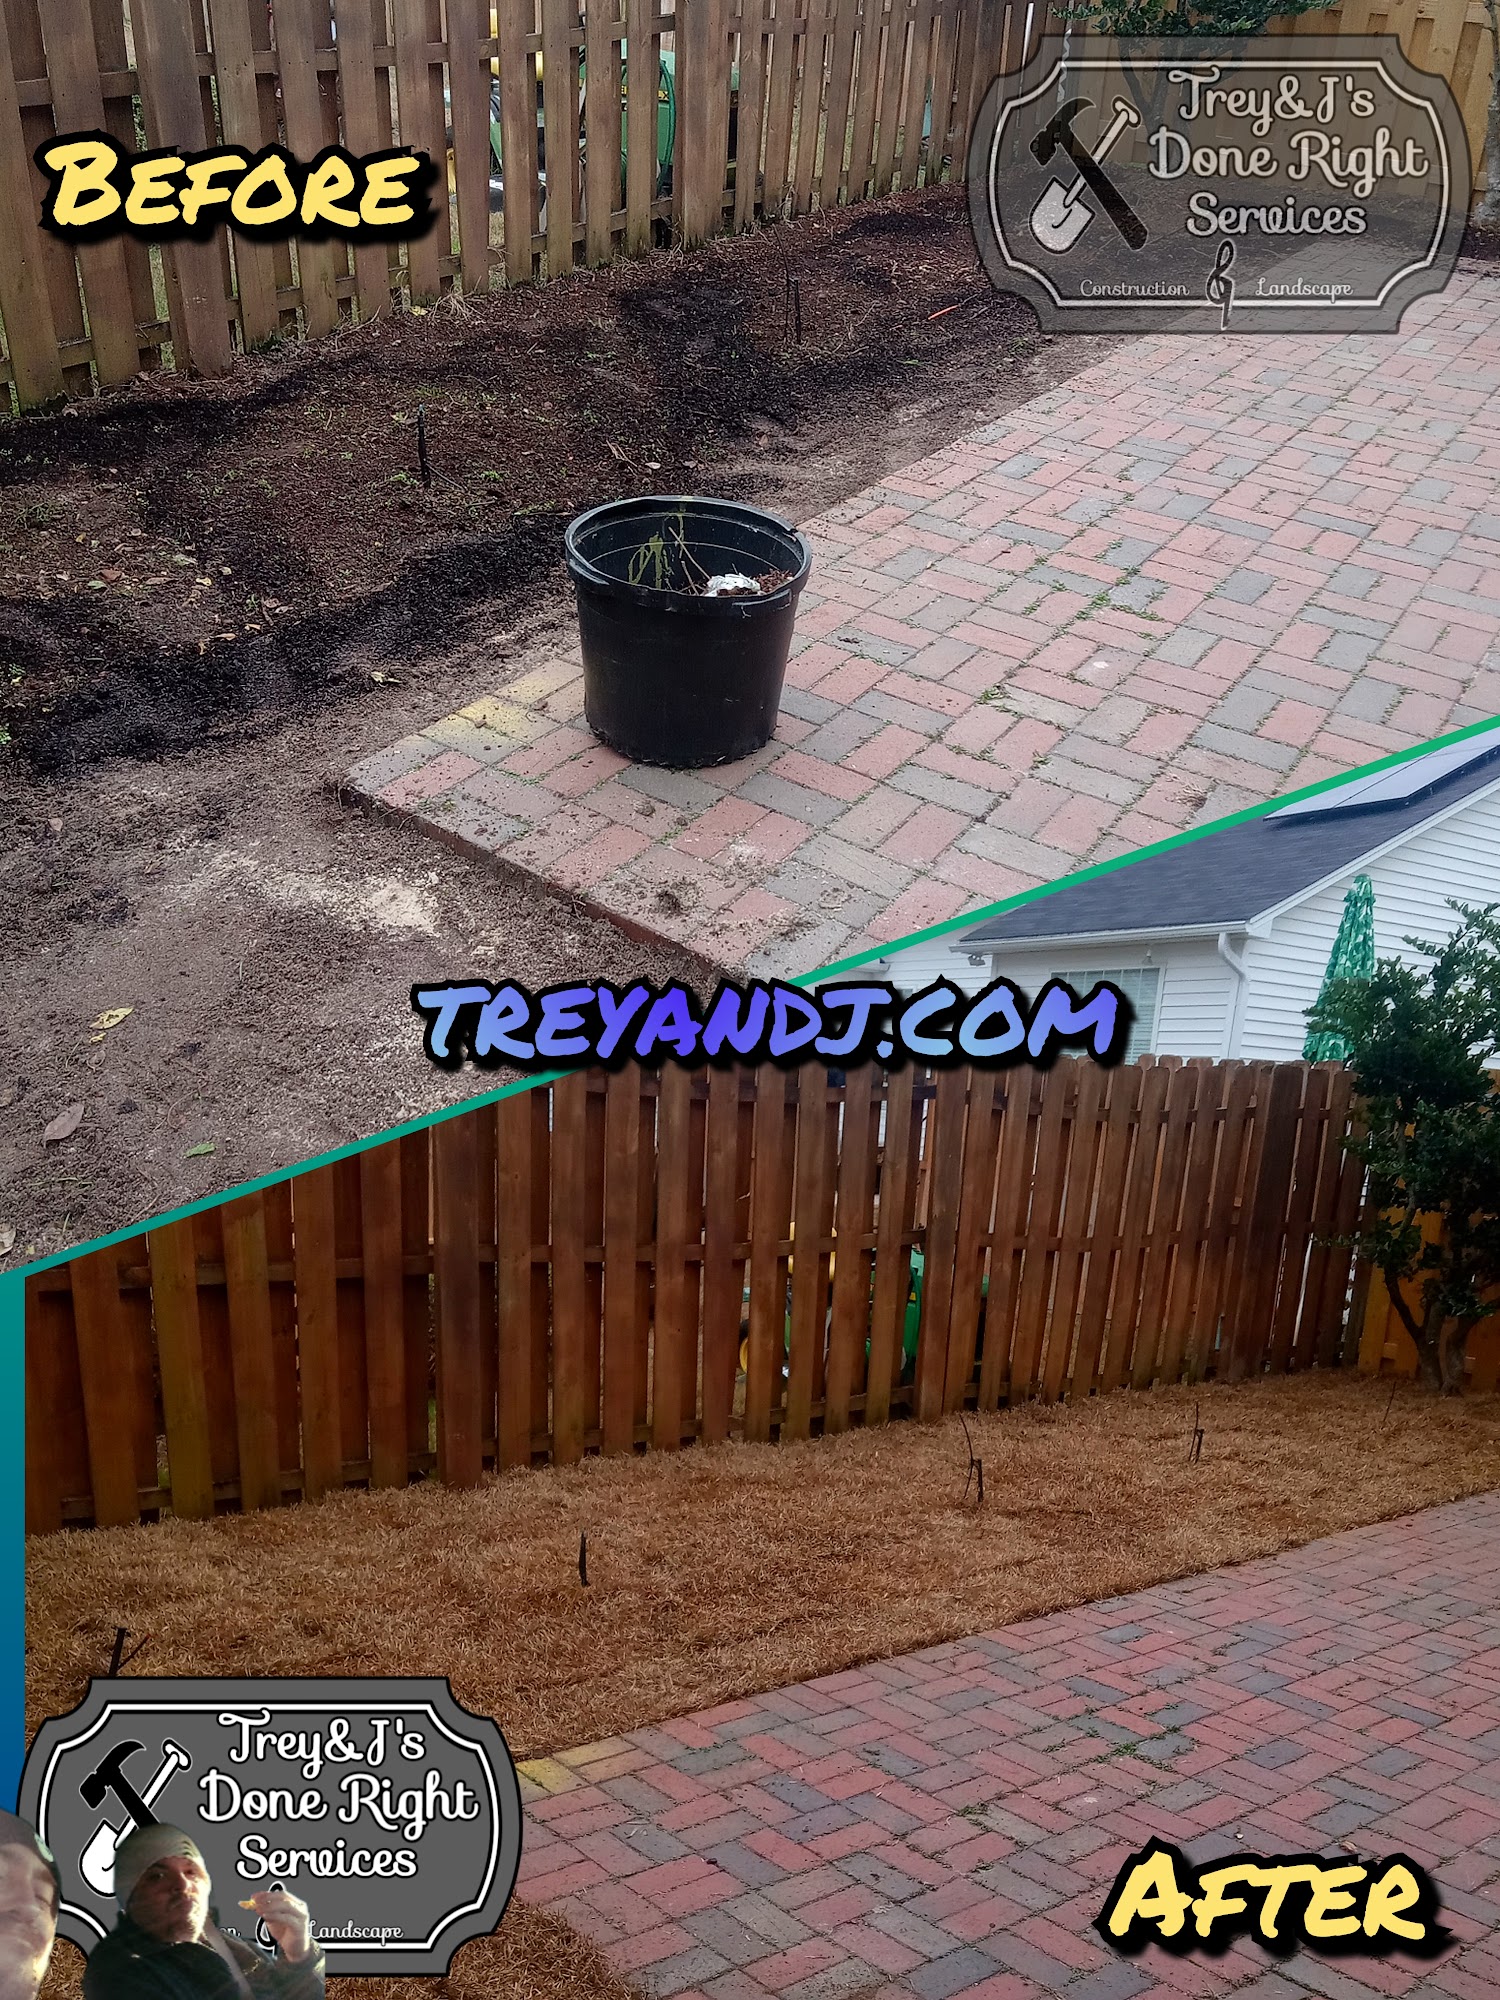 Trey and J's Done Right Services / Landscape, Lawn, and Handyman Services 1429 Trifalia Rd, Scranton South Carolina 29591